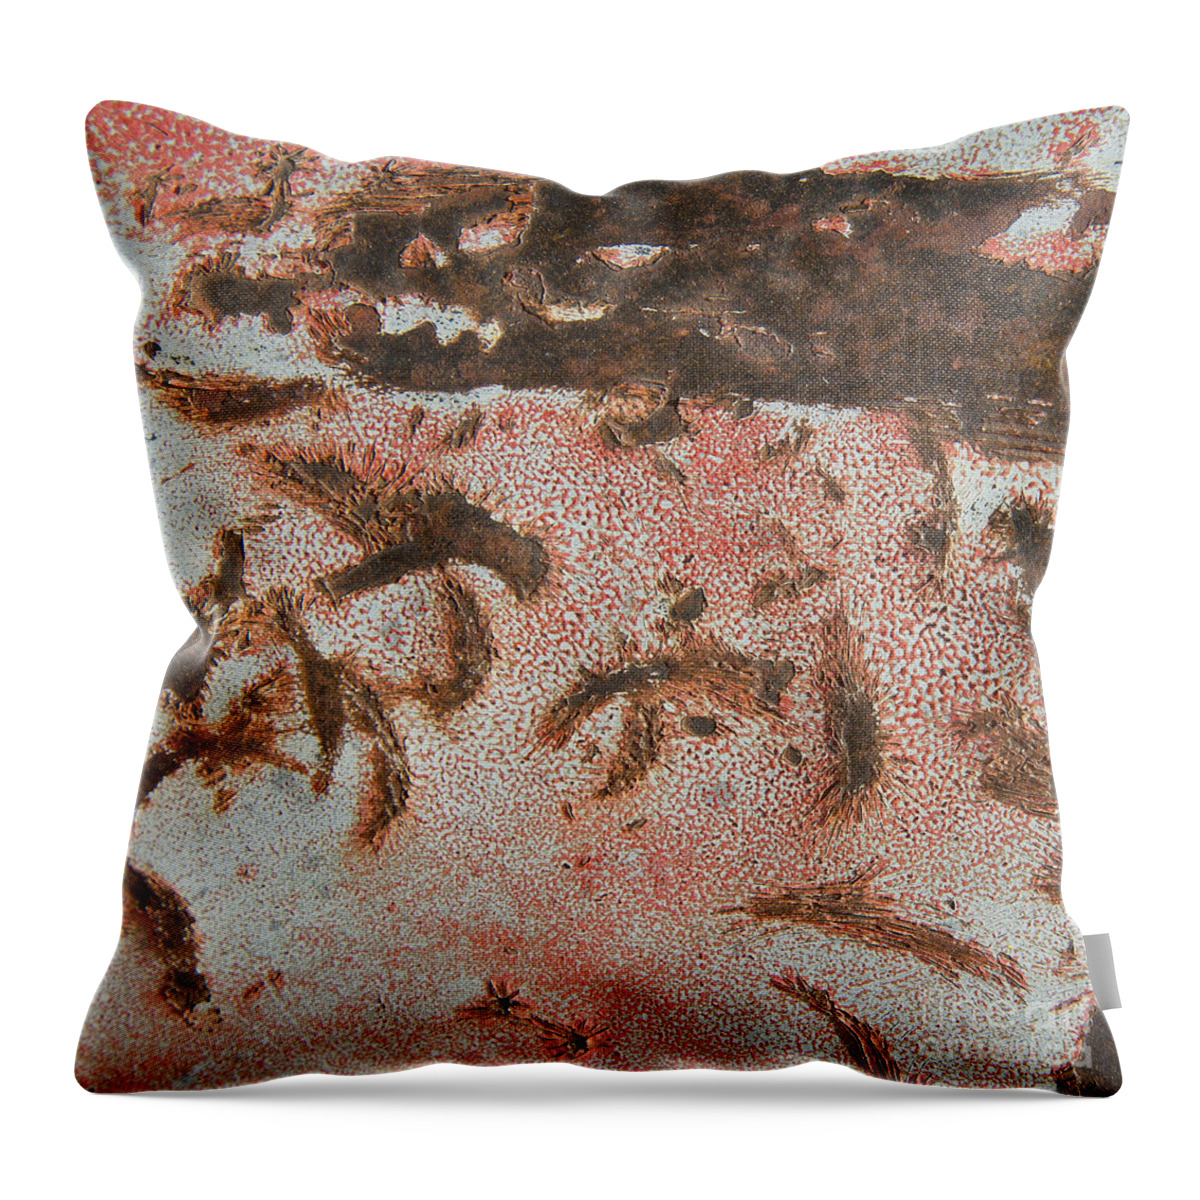 Abstract Throw Pillow featuring the photograph Dragon Doppelganger Abstract Square by Lee Craig